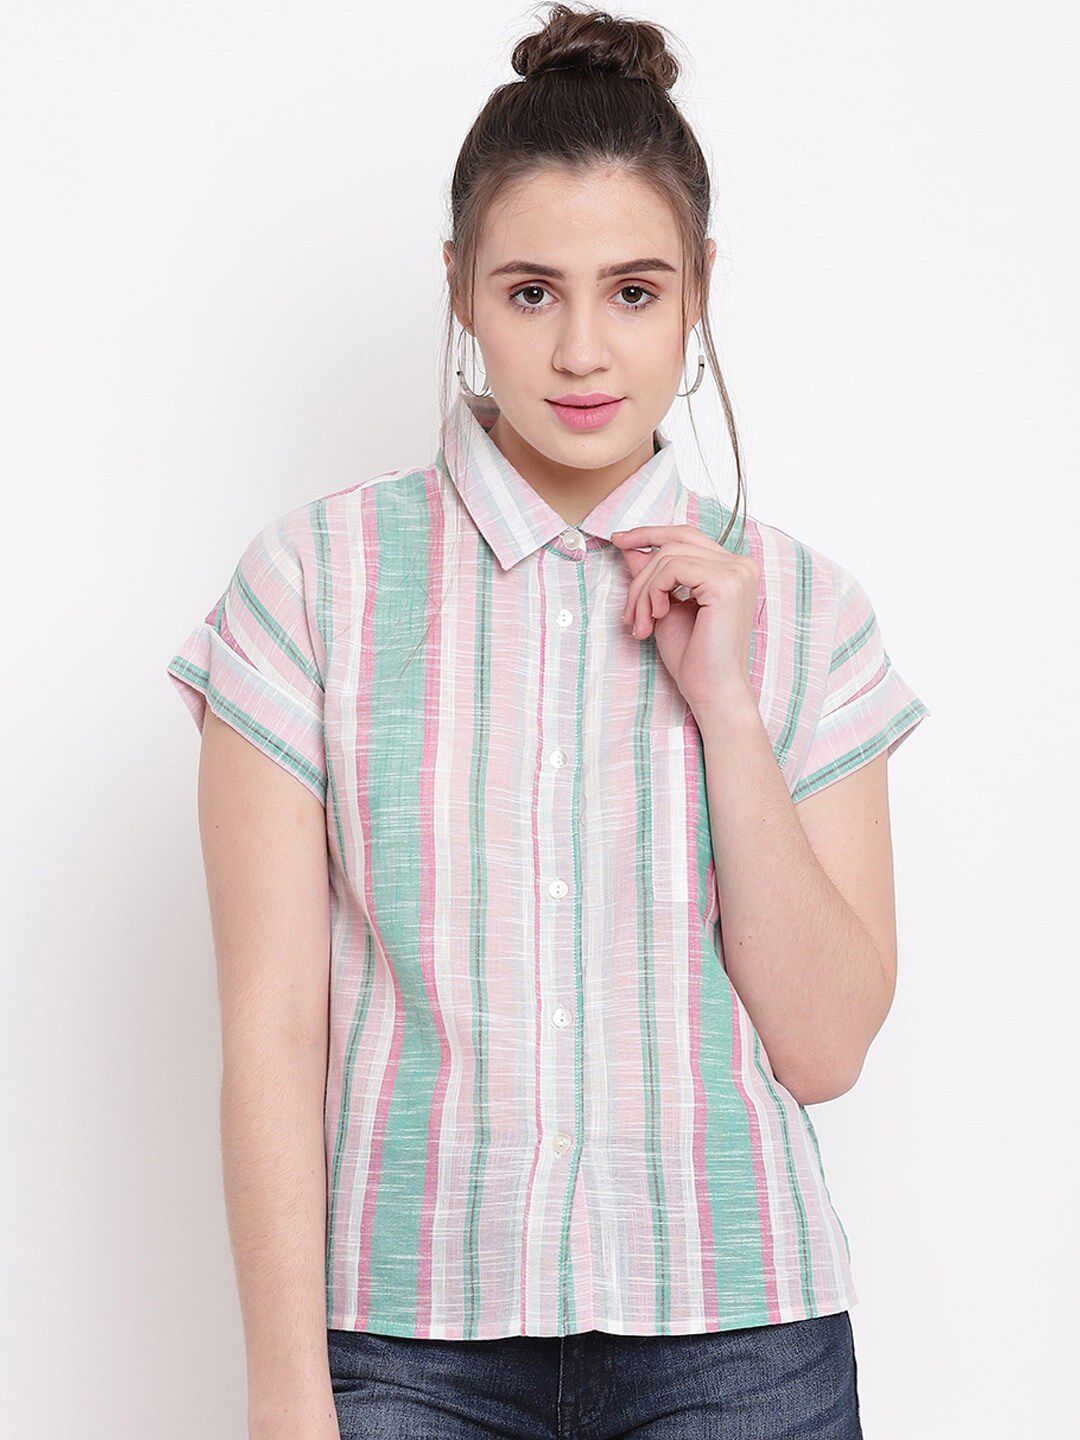 Be Indi Pink Striped Extended Sleeves Shirt Style Cotton Top Price in India